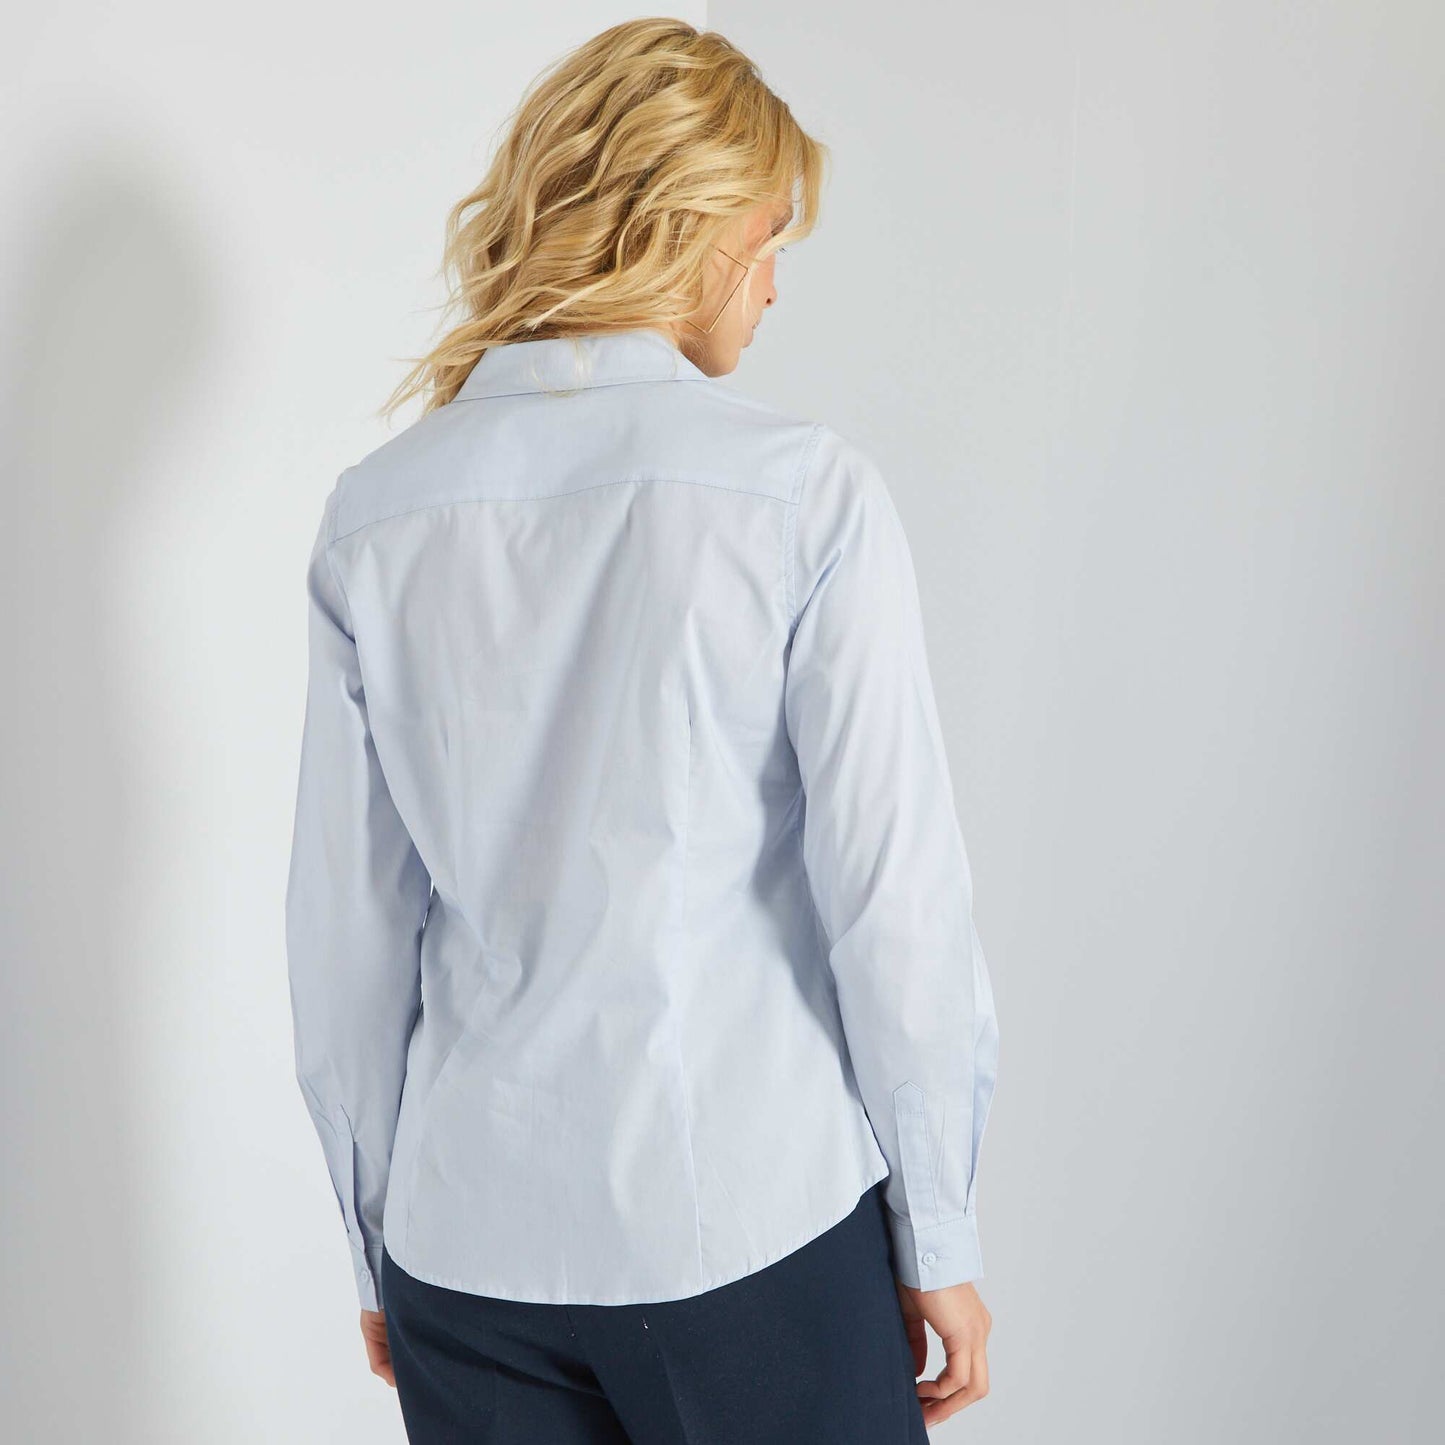 Fitted shirt with cutaway collar blue grey